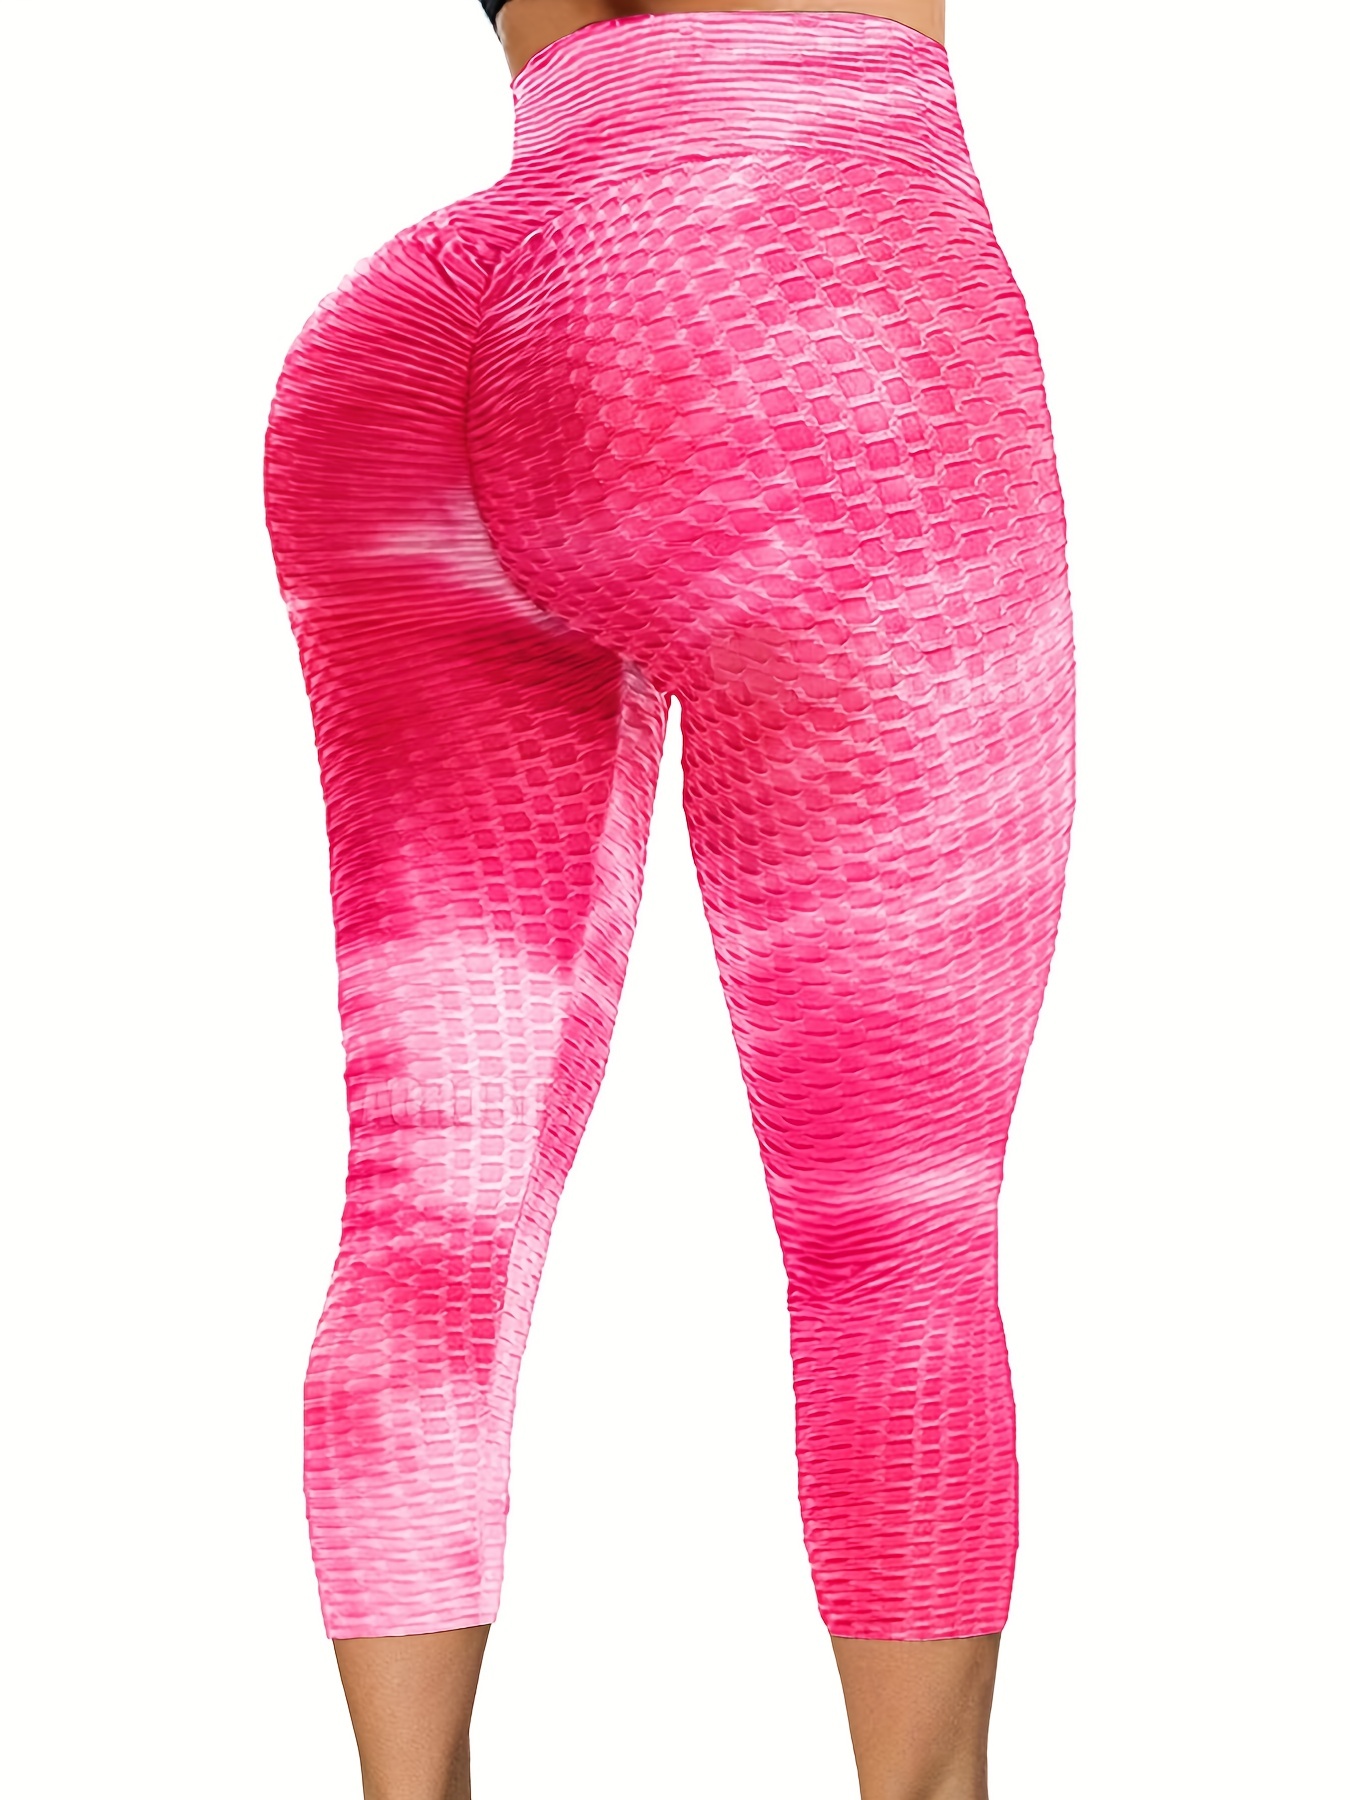 High Waisted Yoga Pants for Women Butt Lift Ruched Scrunch Butt Leggings  Workout Tummy Control Booty Tights 